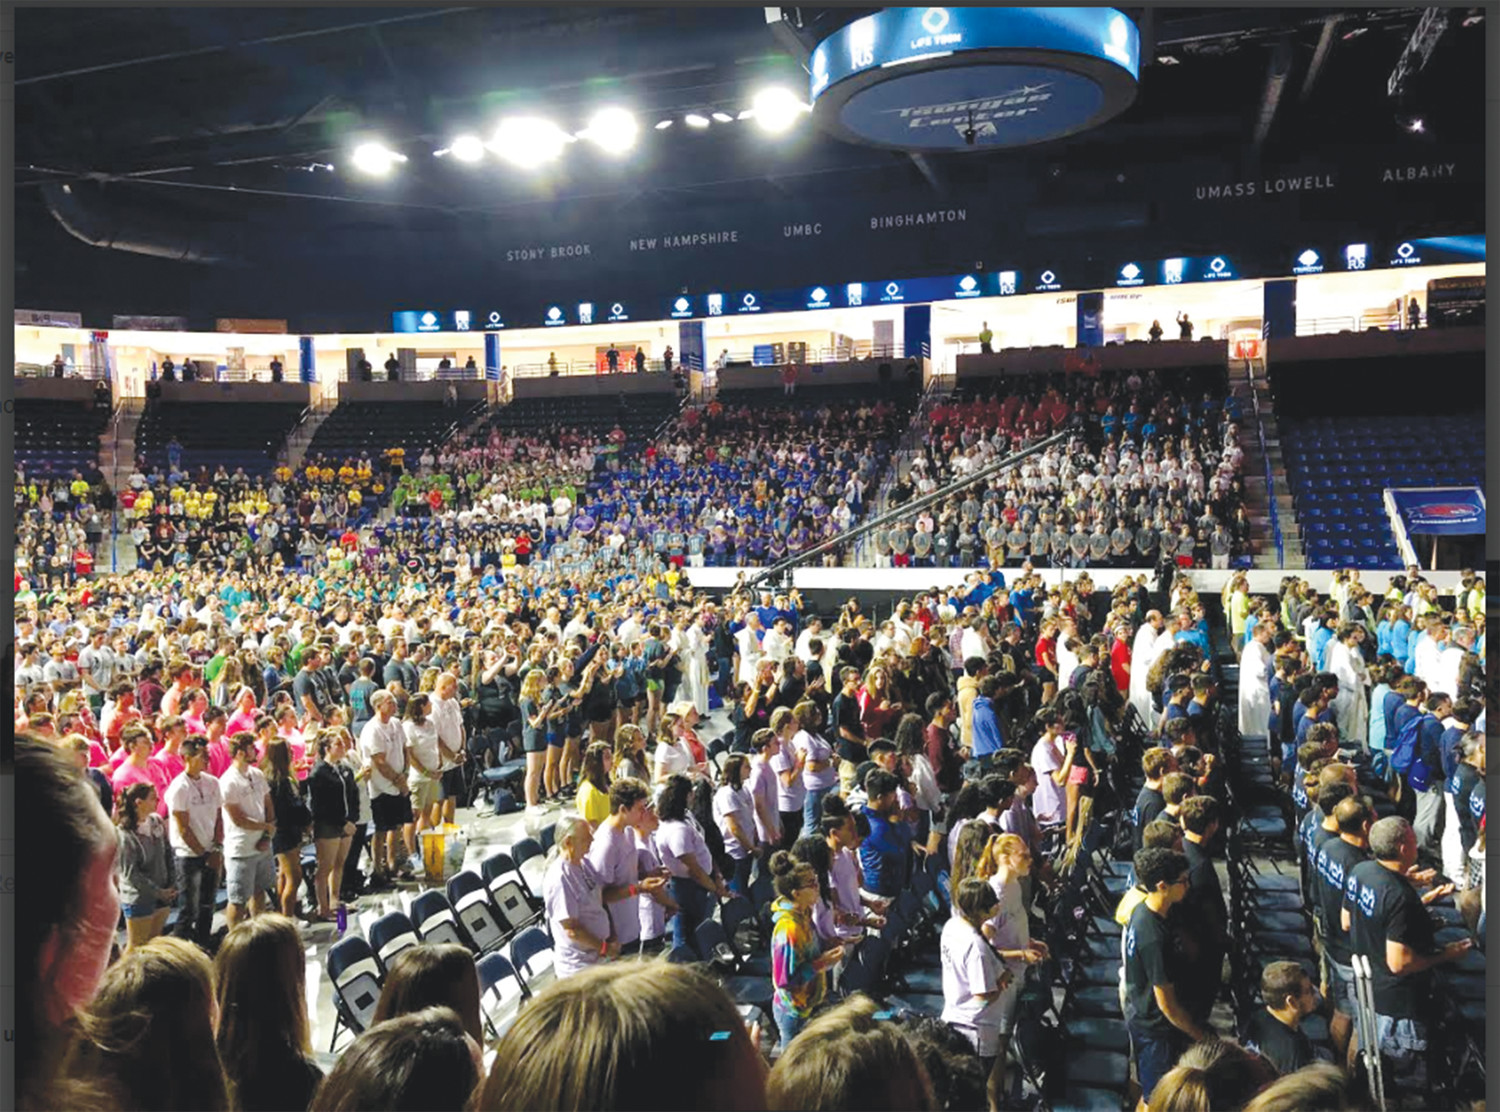 Saturday night at a Steubenville East conference is known as a powerful and moving experience for teens when youth from around New England, including many groups from the Diocese of Providence, encounter Jesus through adoration.